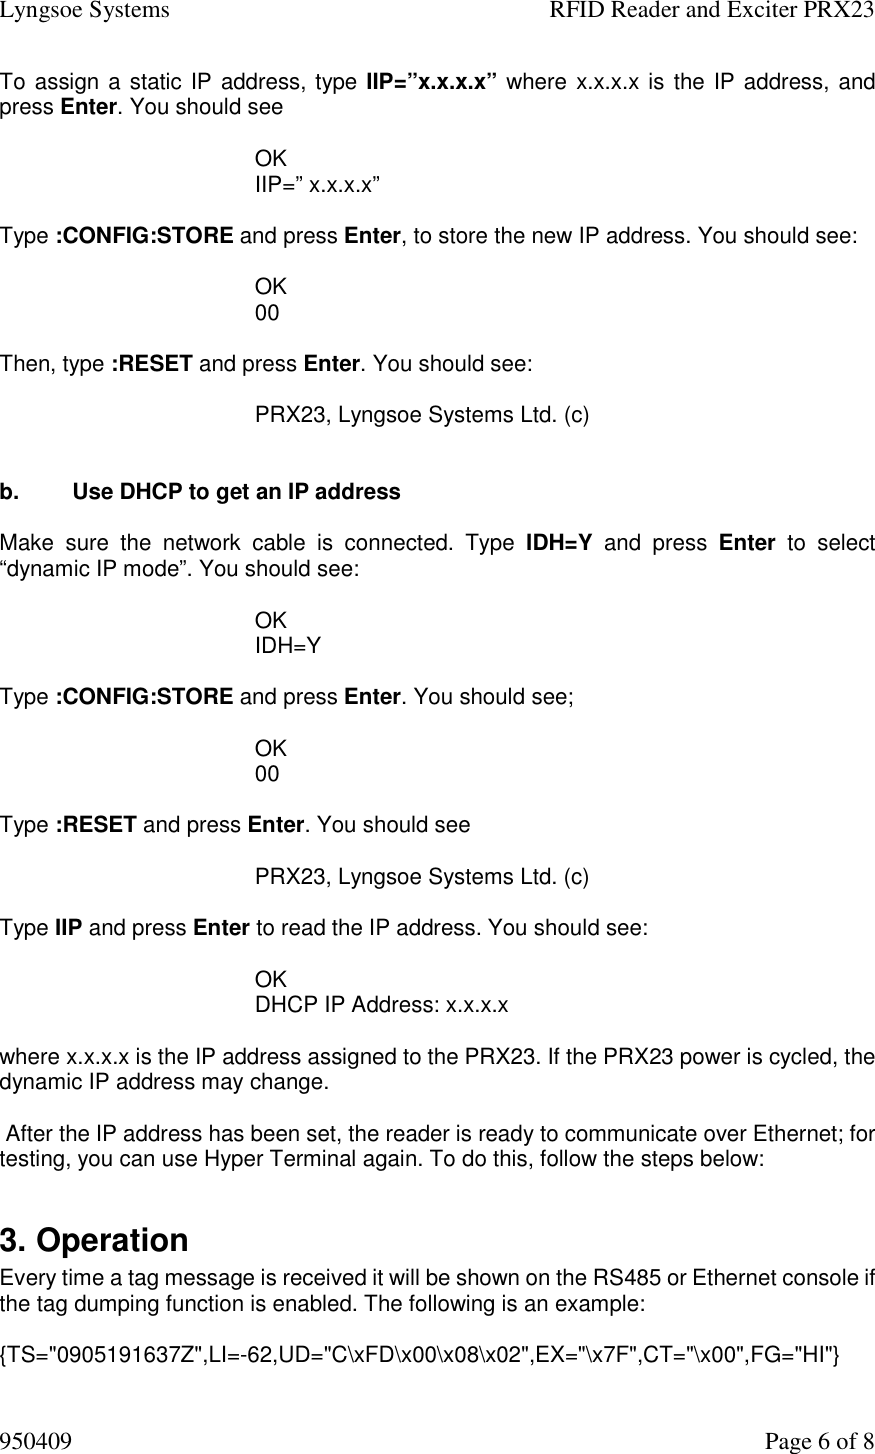 Lyngsoe Systems    RFID Reader and Exciter PRX23 950409    Page 6 of 8 To assign a static IP address, type IIP=”x.x.x.x” where x.x.x.x is the IP address, and press Enter. You should see  OK IIP=” x.x.x.x”  Type :CONFIG:STORE and press Enter, to store the new IP address. You should see:  OK 00  Then, type :RESET and press Enter. You should see:    PRX23, Lyngsoe Systems Ltd. (c)     b.  Use DHCP to get an IP address  Make  sure  the  network  cable  is  connected.  Type  IDH=Y  and  press  Enter  to  select “dynamic IP mode”. You should see:  OK IDH=Y  Type :CONFIG:STORE and press Enter. You should see;  OK 00  Type :RESET and press Enter. You should see  PRX23, Lyngsoe Systems Ltd. (c)    Type IIP and press Enter to read the IP address. You should see:  OK DHCP IP Address: x.x.x.x  where x.x.x.x is the IP address assigned to the PRX23. If the PRX23 power is cycled, the dynamic IP address may change.   After the IP address has been set, the reader is ready to communicate over Ethernet; for testing, you can use Hyper Terminal again. To do this, follow the steps below:  3. Operation  Every time a tag message is received it will be shown on the RS485 or Ethernet console if the tag dumping function is enabled. The following is an example:  {TS=&quot;0905191637Z&quot;,LI=-62,UD=&quot;C\xFD\x00\x08\x02&quot;,EX=&quot;\x7F&quot;,CT=&quot;\x00&quot;,FG=&quot;HI&quot;} 